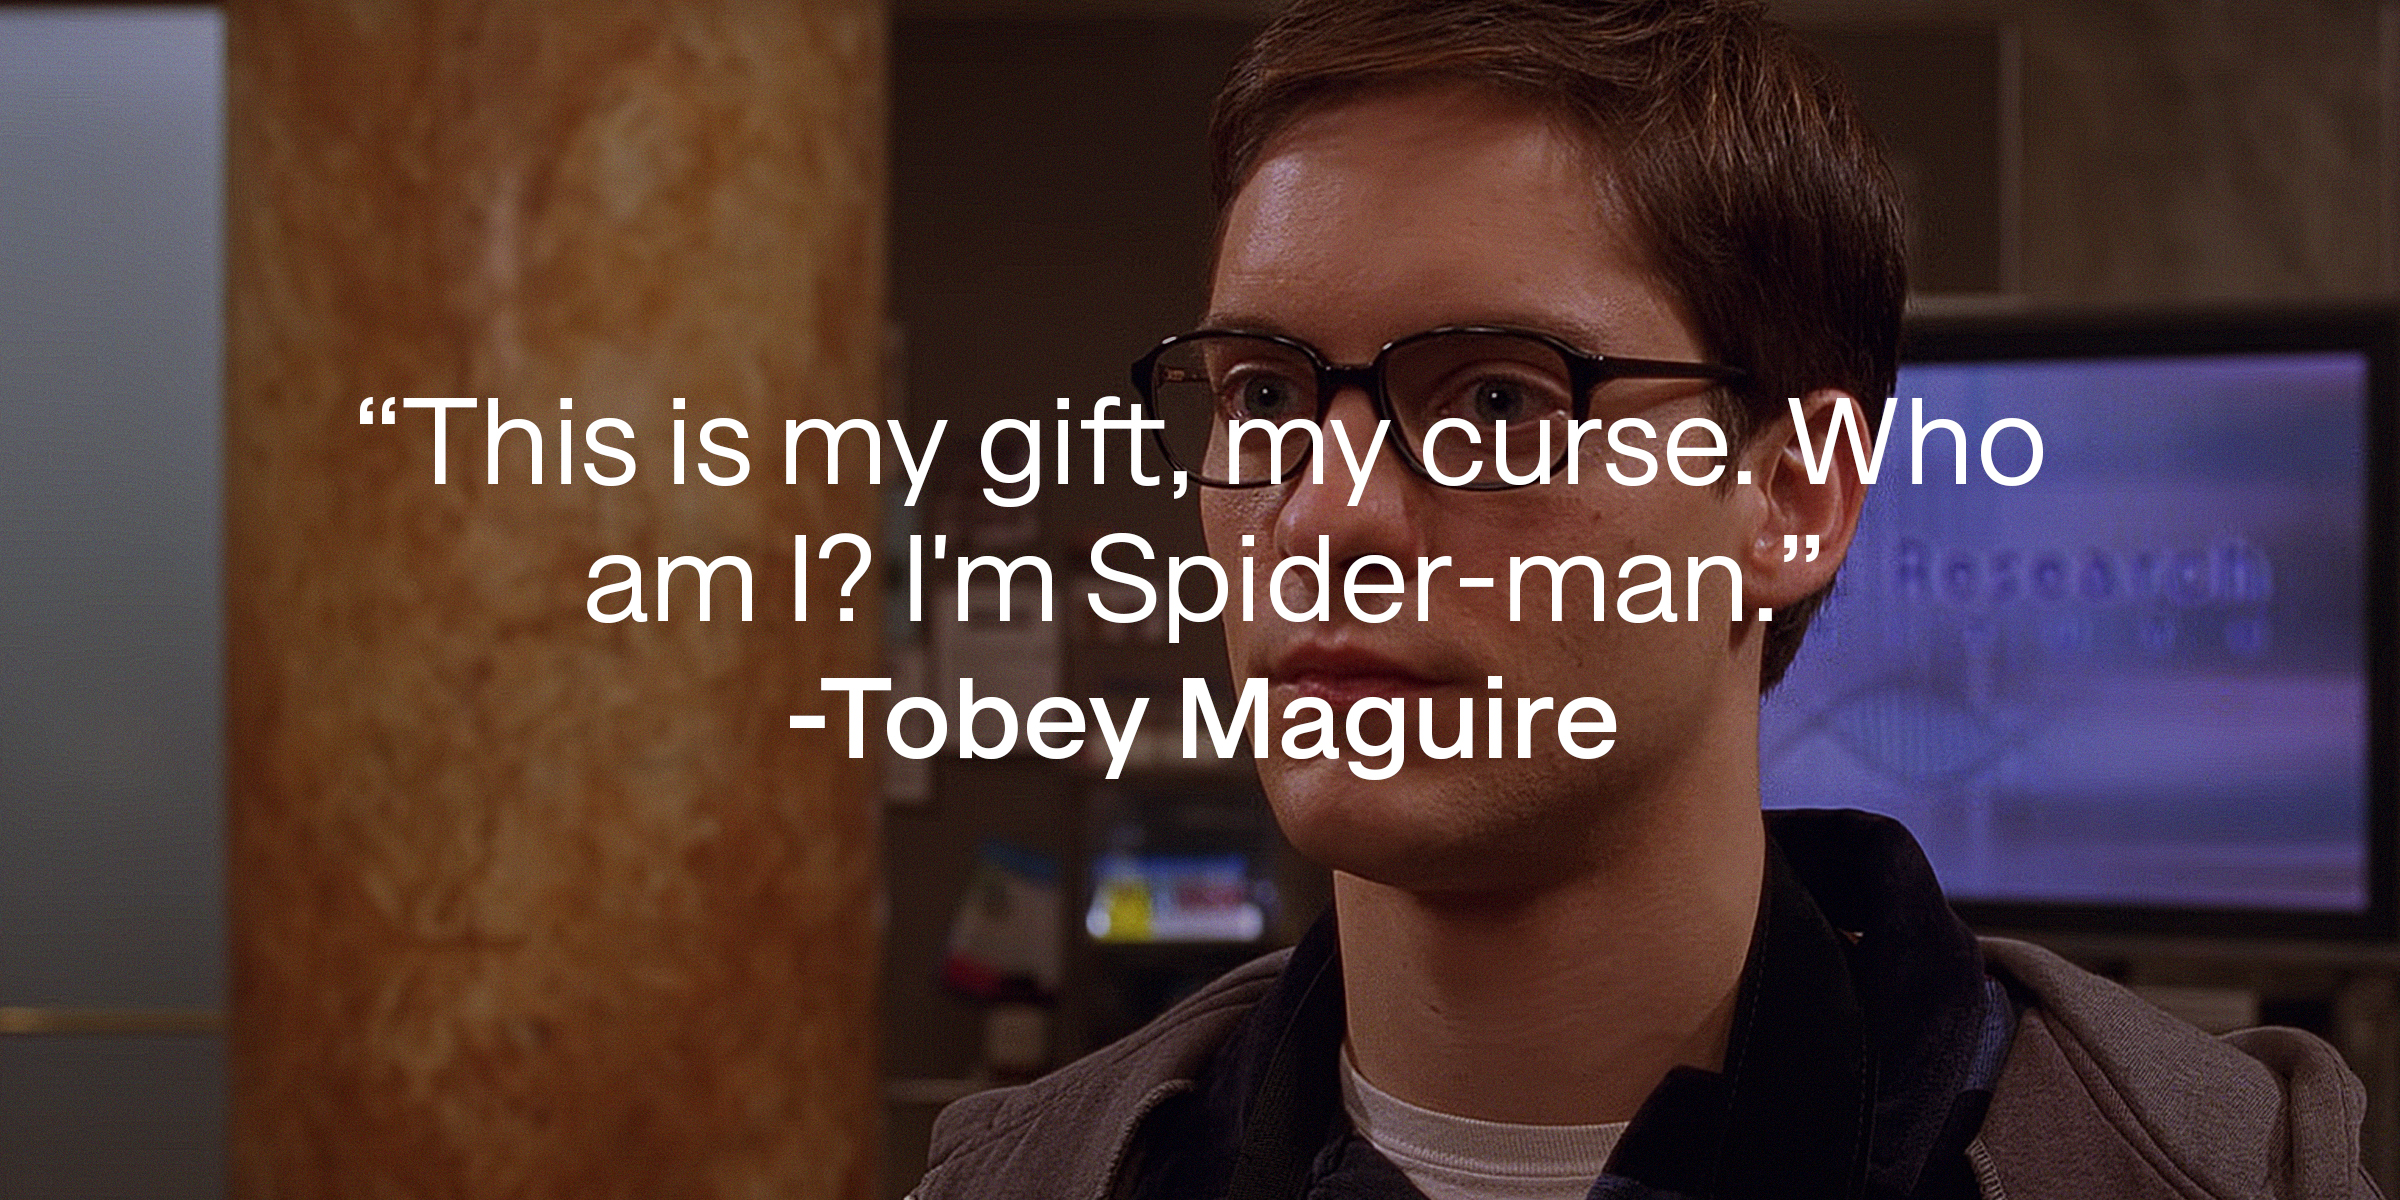 A photo of Tobey Maguire with Tobey Maguire's quote: "This is my gift, my curse. Who am I? I'm Spider-man.” | Source: youtube.com/sonypictures